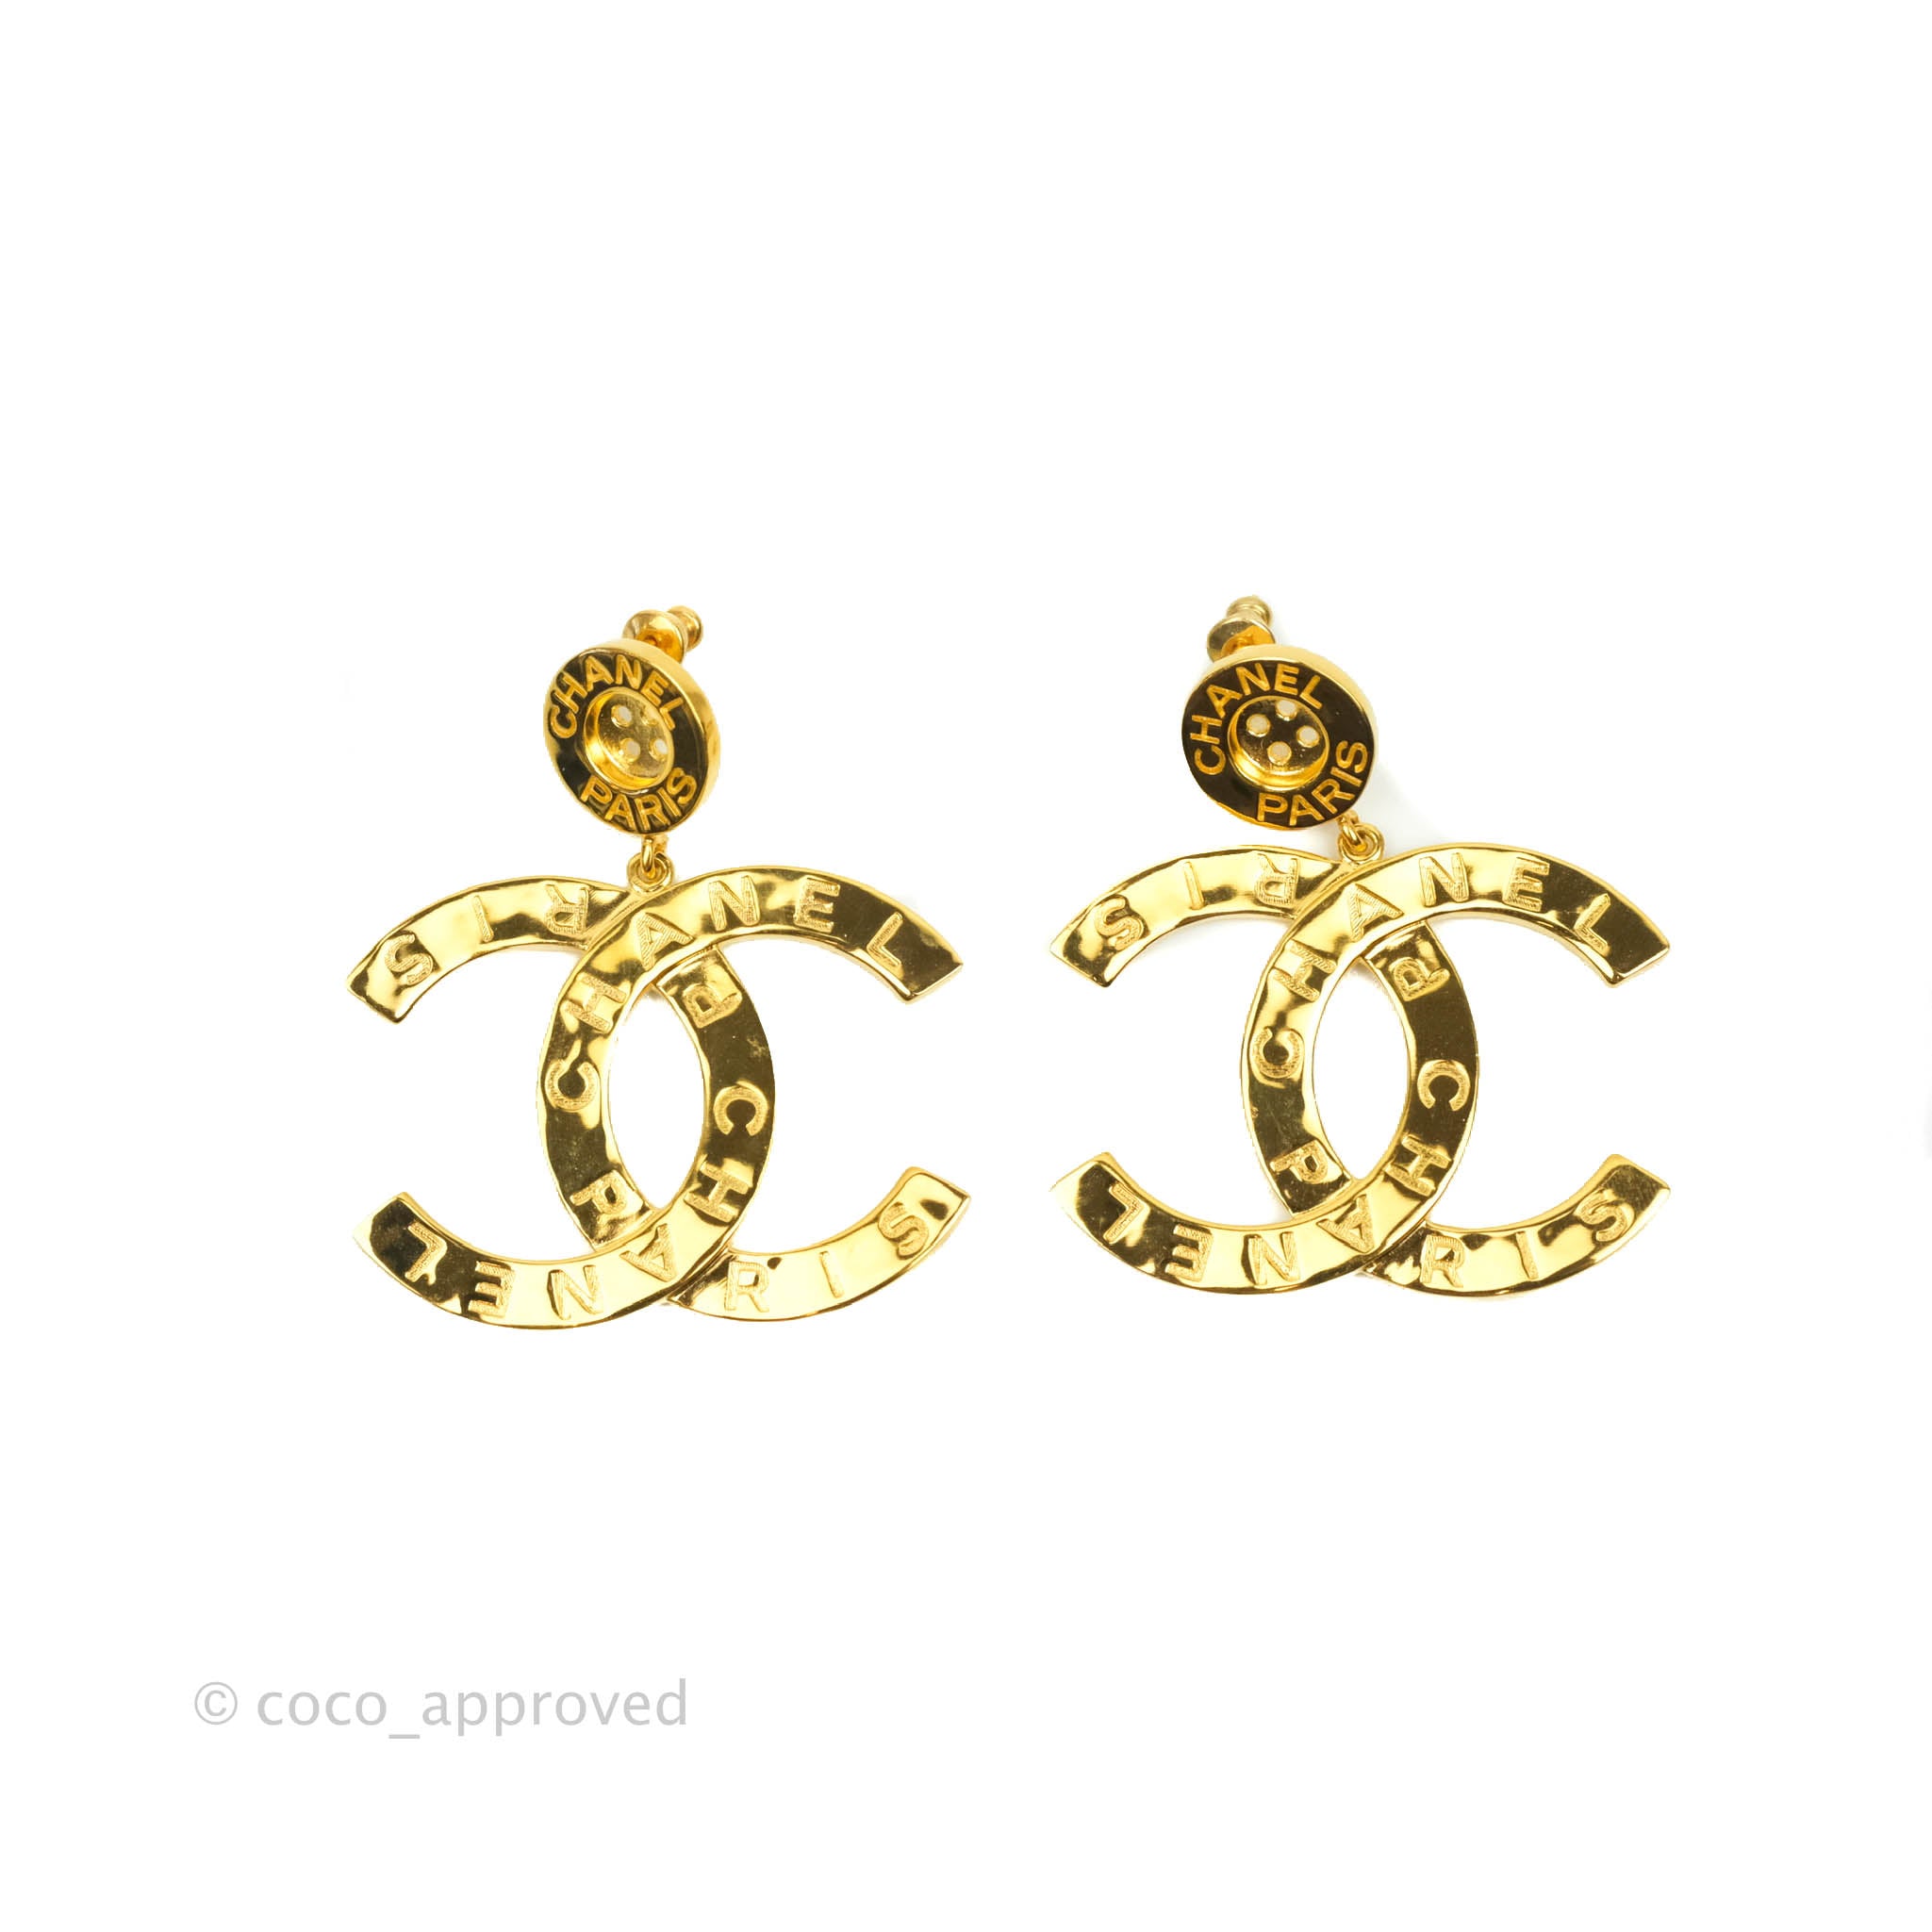 Chanel Large CC Button Drop Earrings Gold Tone 20A Coco Approved Studio